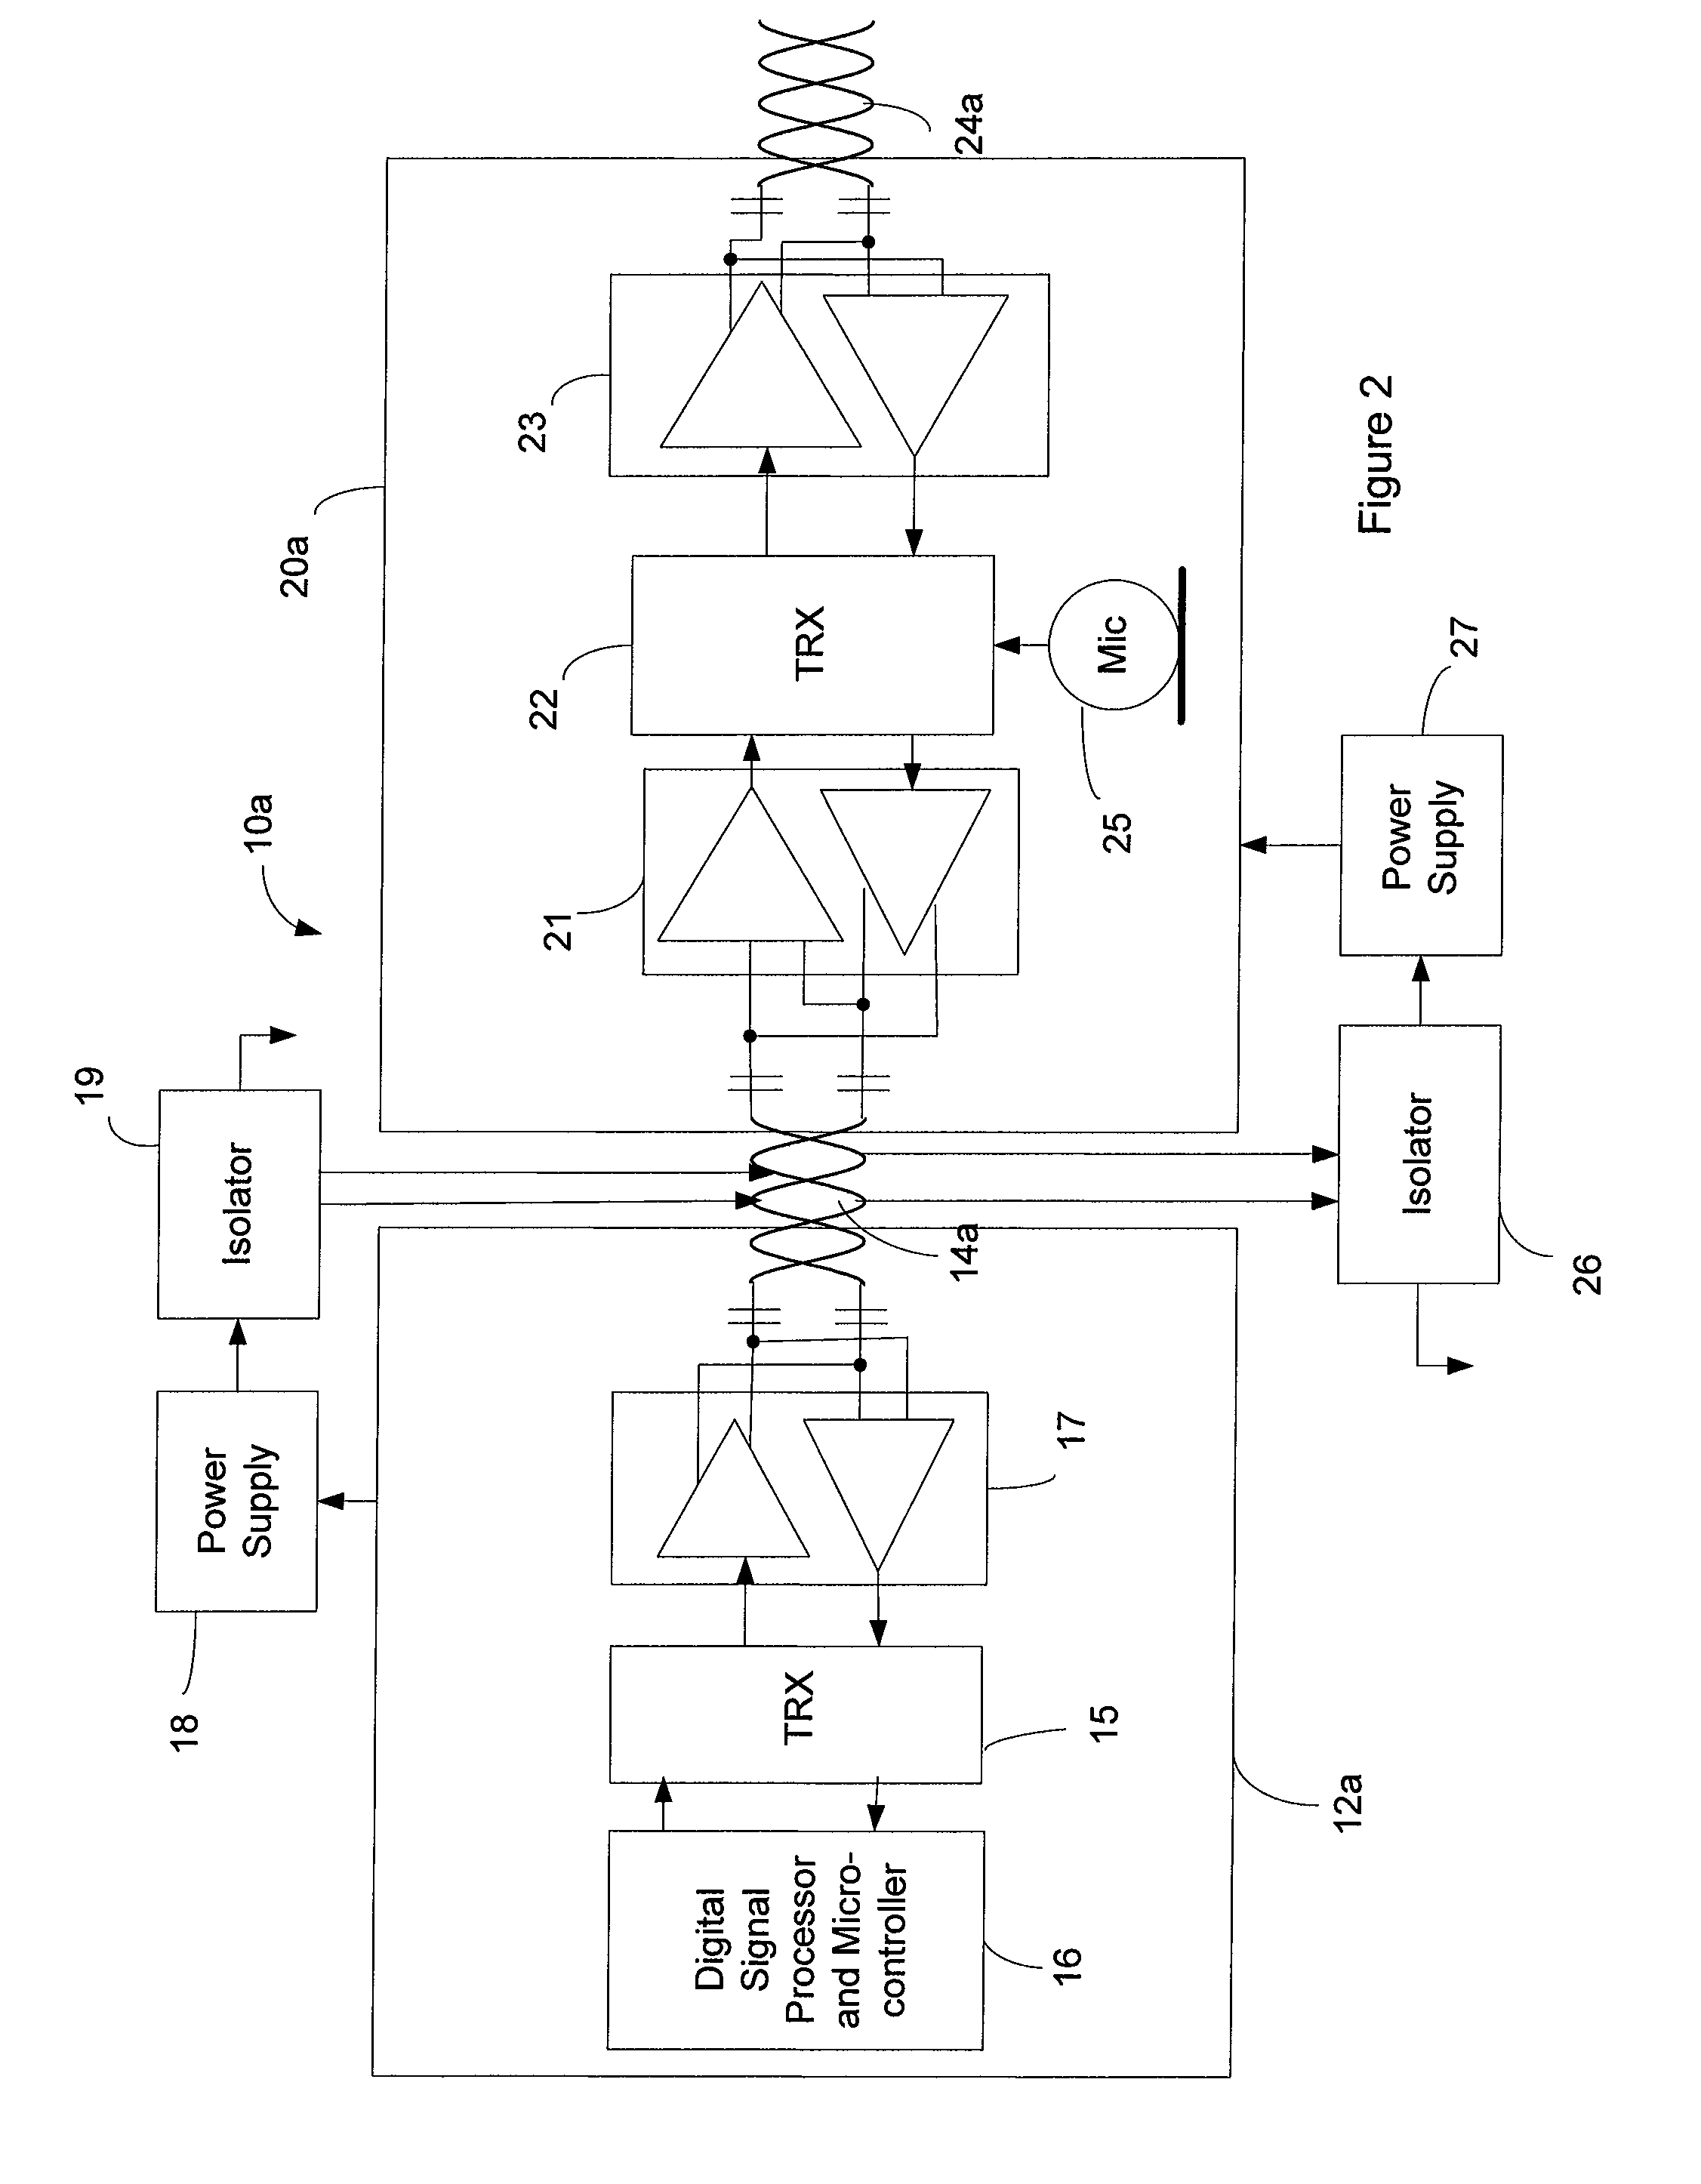 System for accomplishing bi-directional audio data and control communications